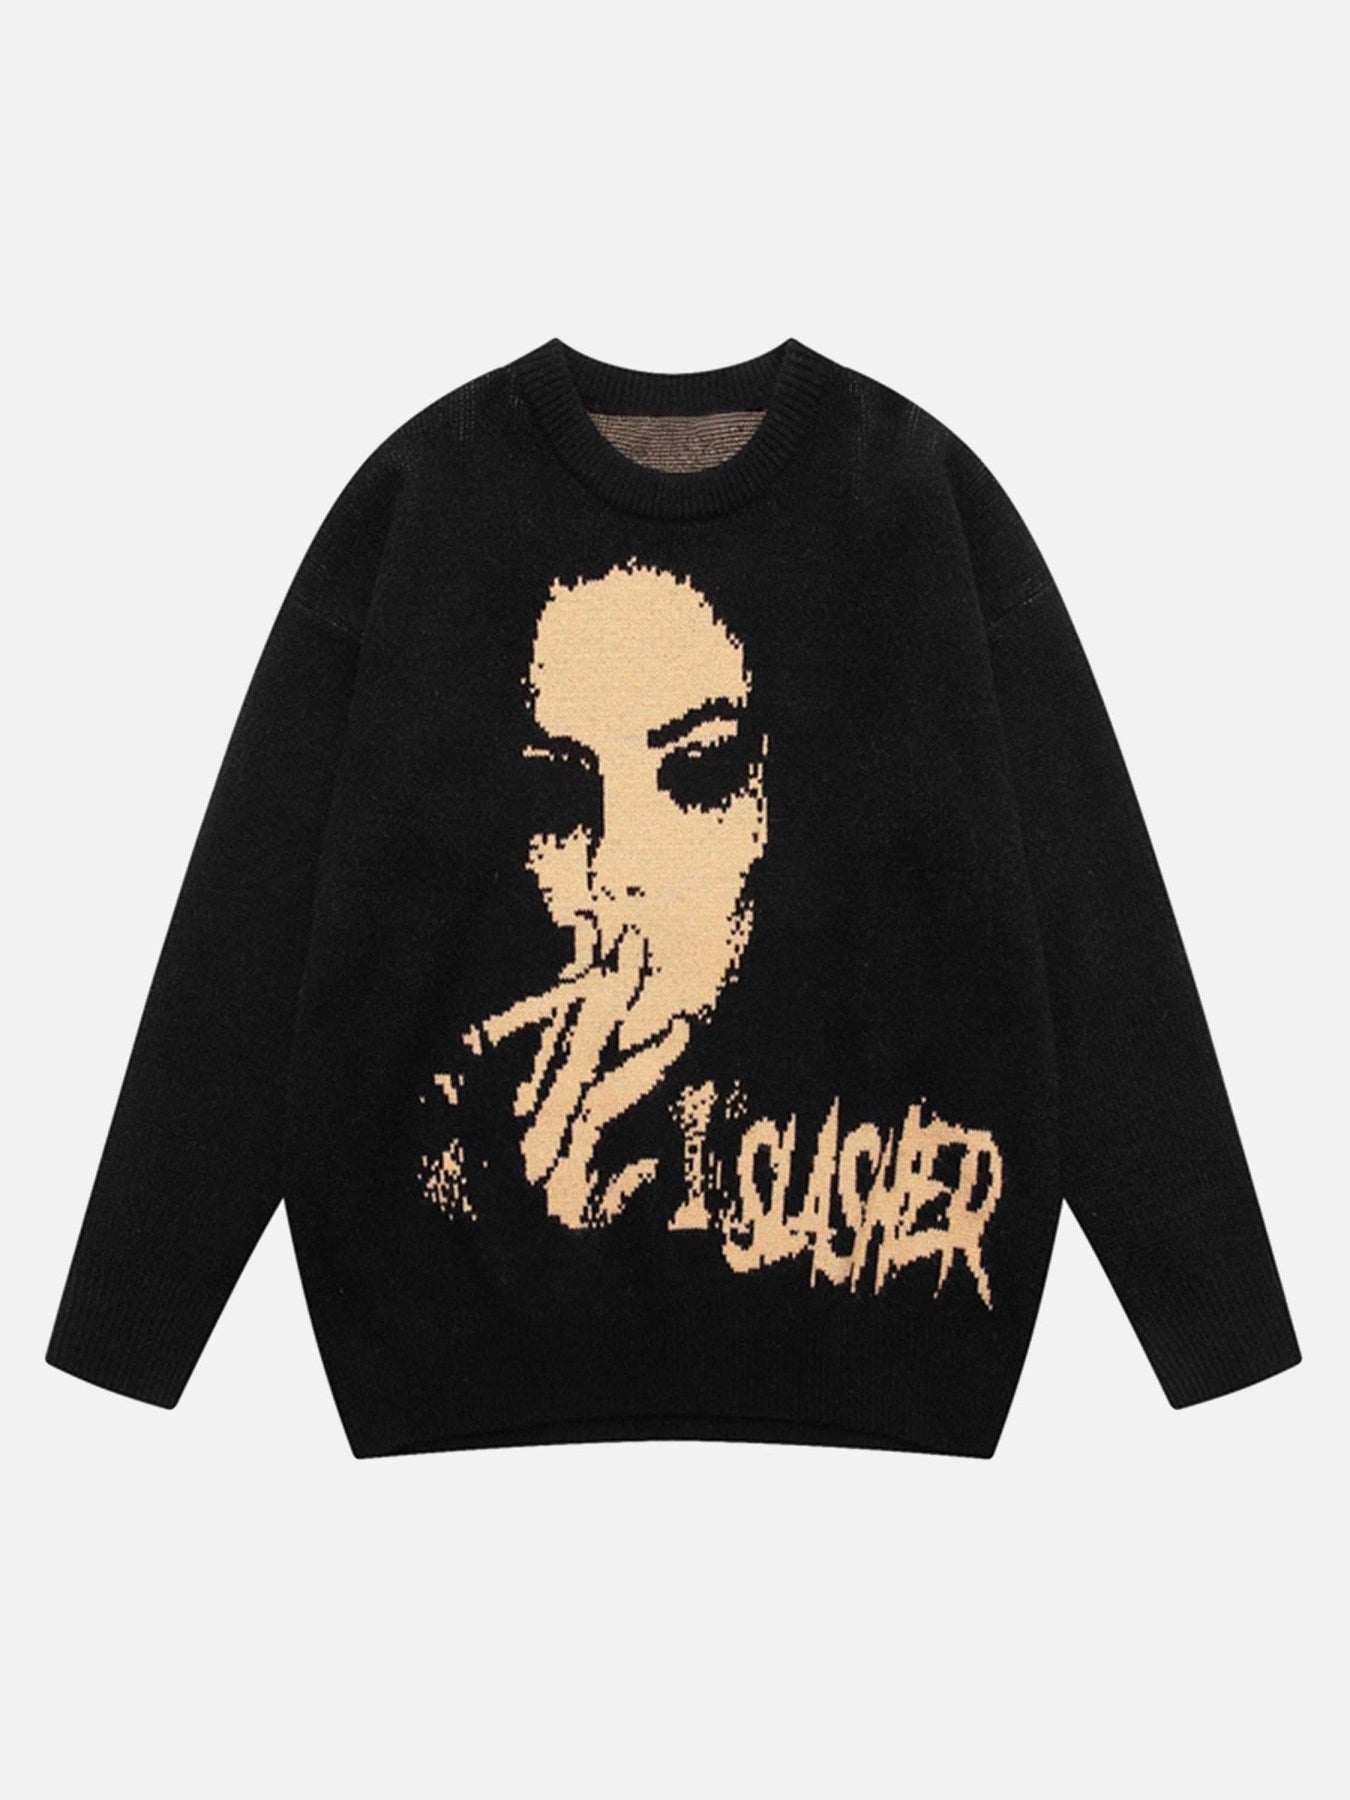 Thesupermade Street Vintage Character Knit Sweater